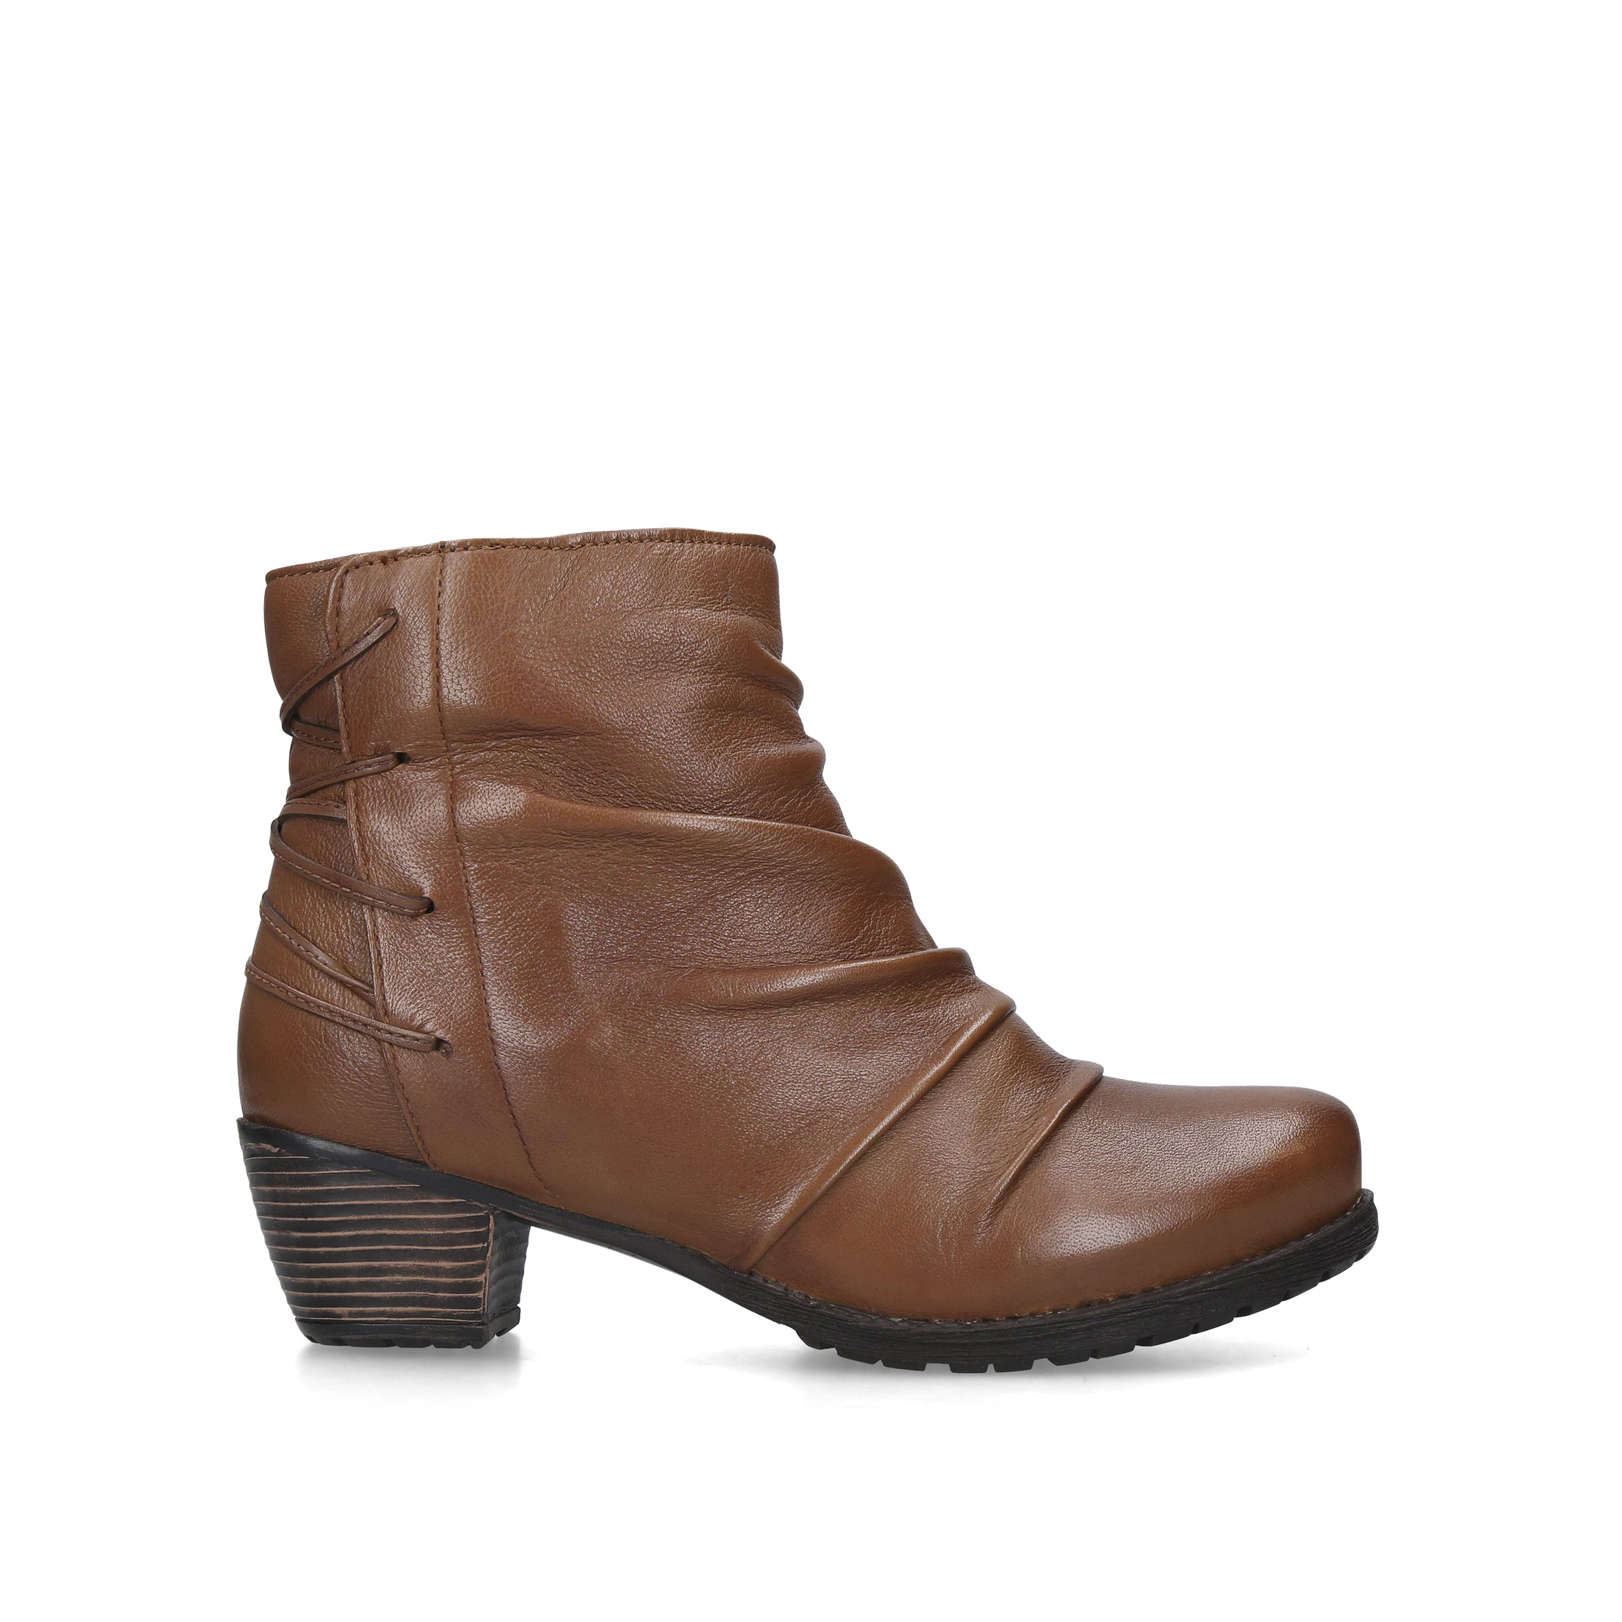 FORTUNE - LOTUS Ankle Boots